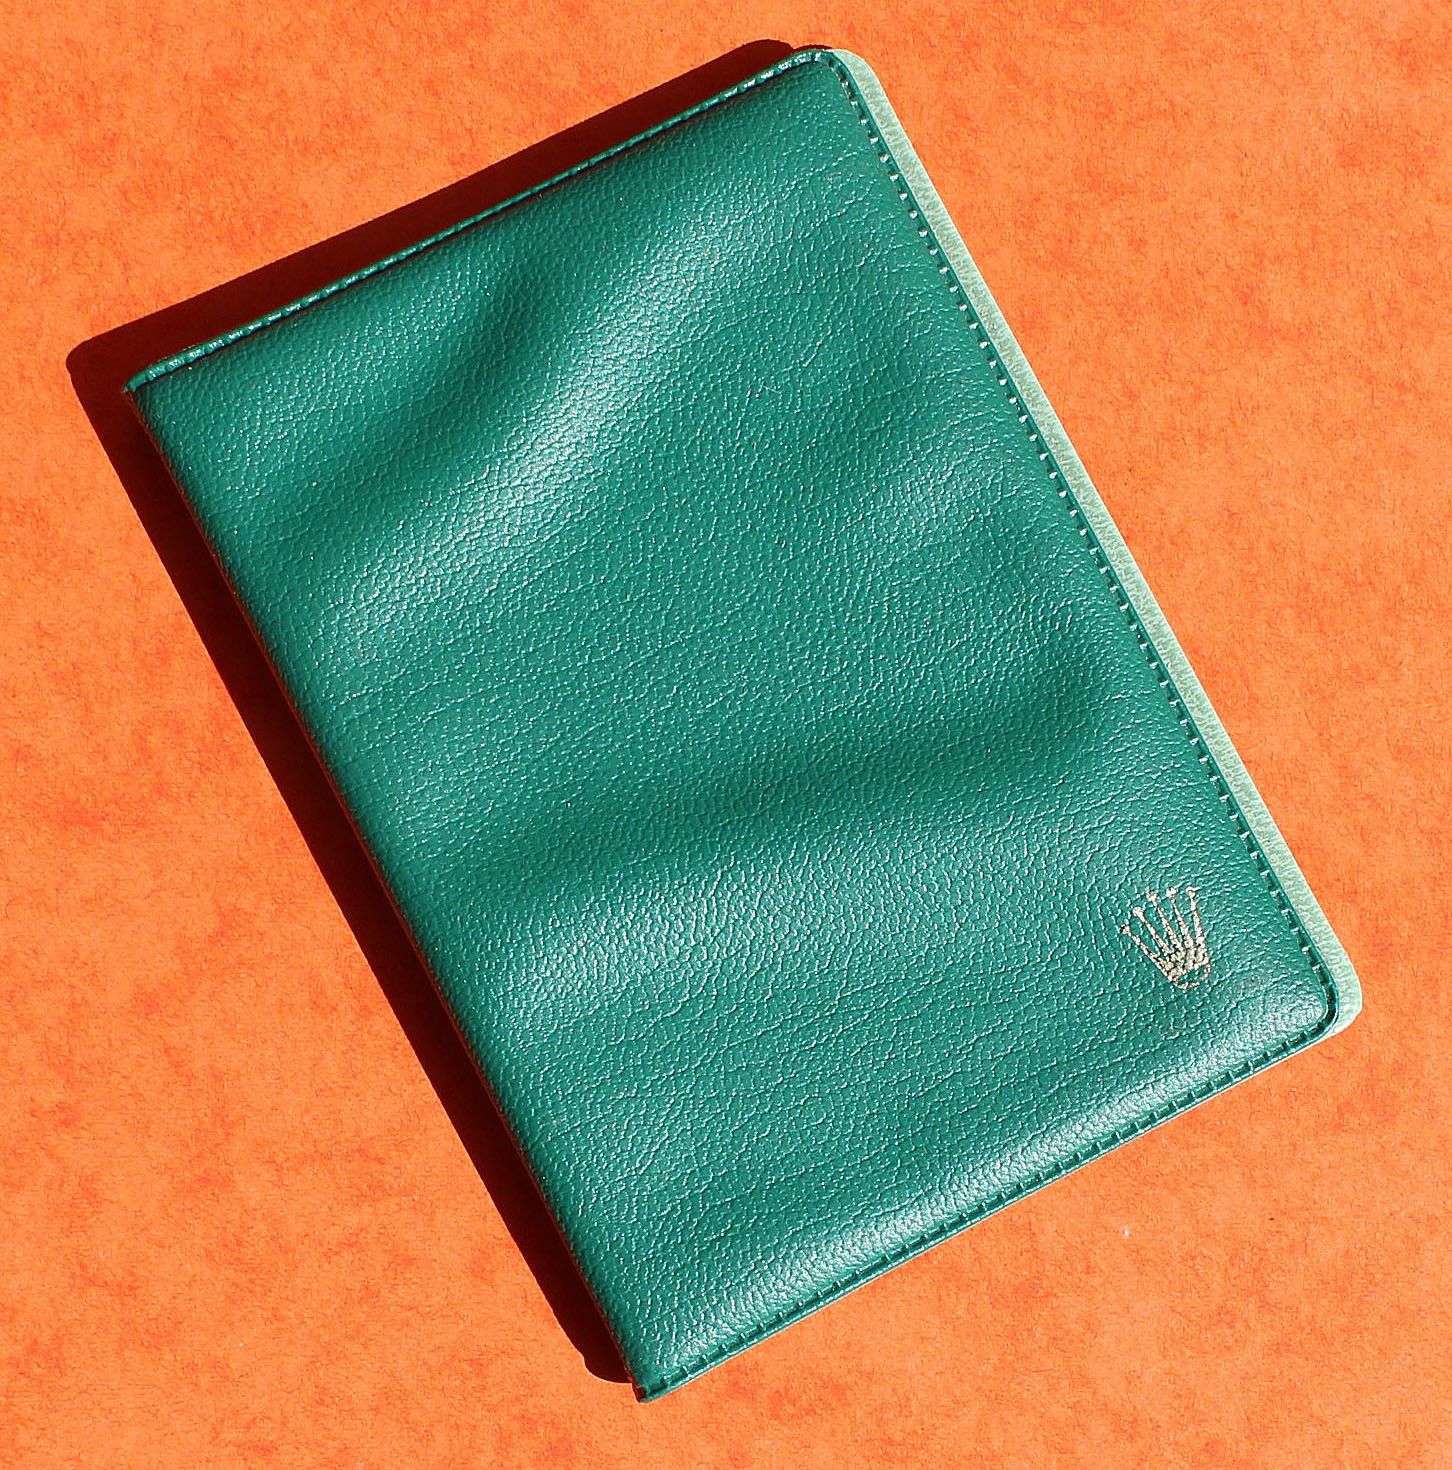 Vintage Rolex green plastic card holder from 1960's 5512, 5513, 1665, 1680,